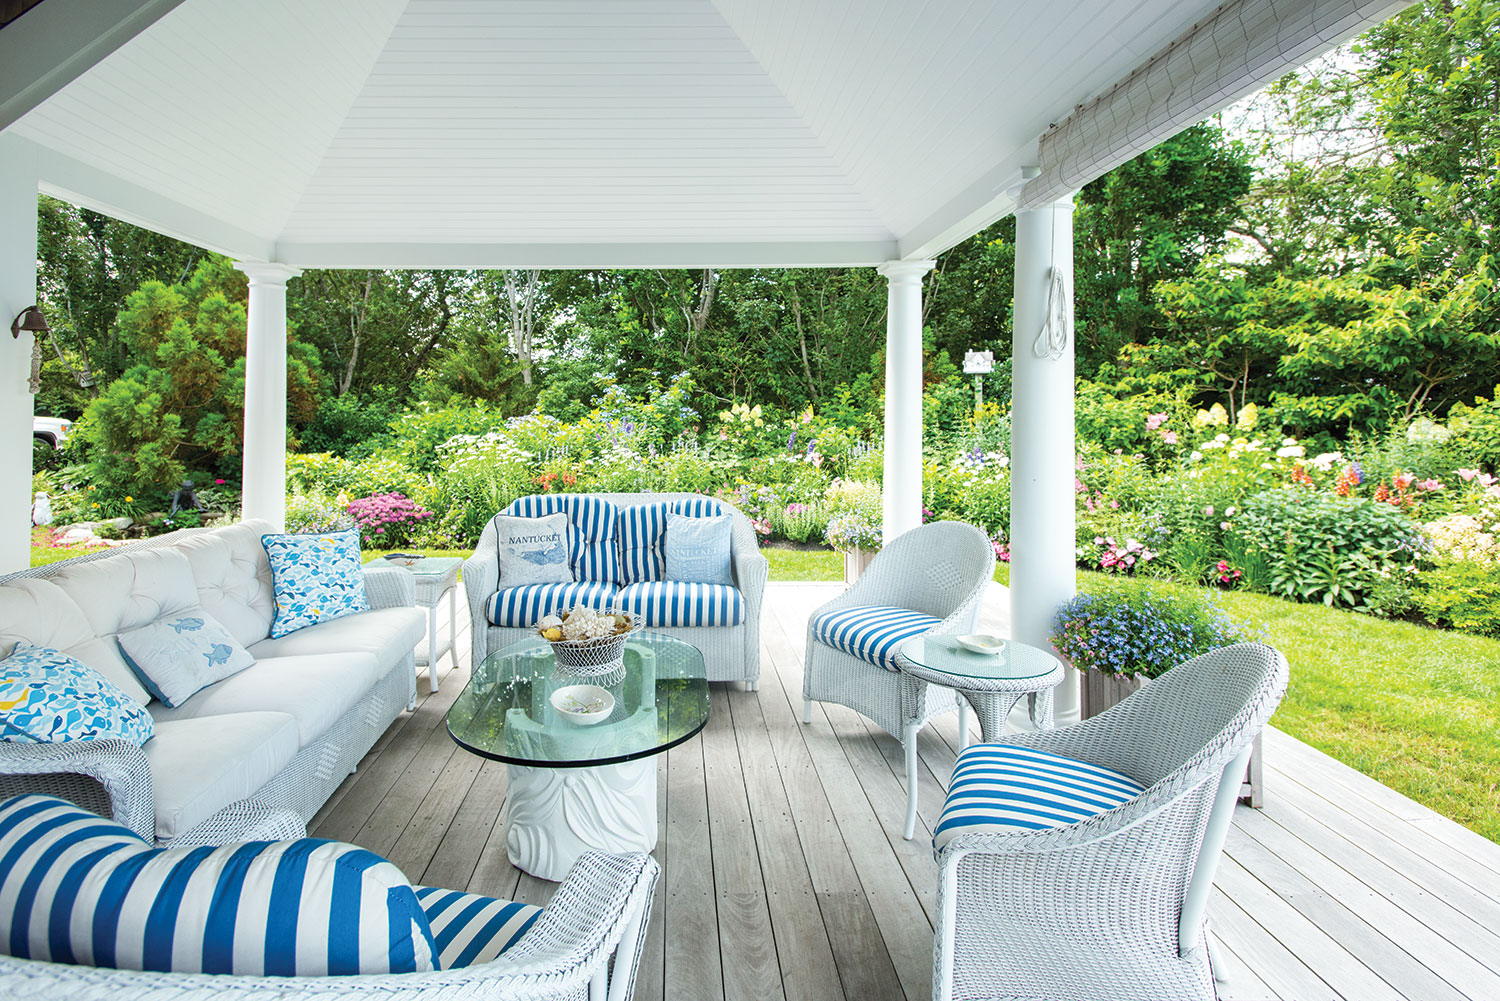 Wicker furniture with blue and white striped cushions on the porch at Bucktucket, at Nantucket home and garden.